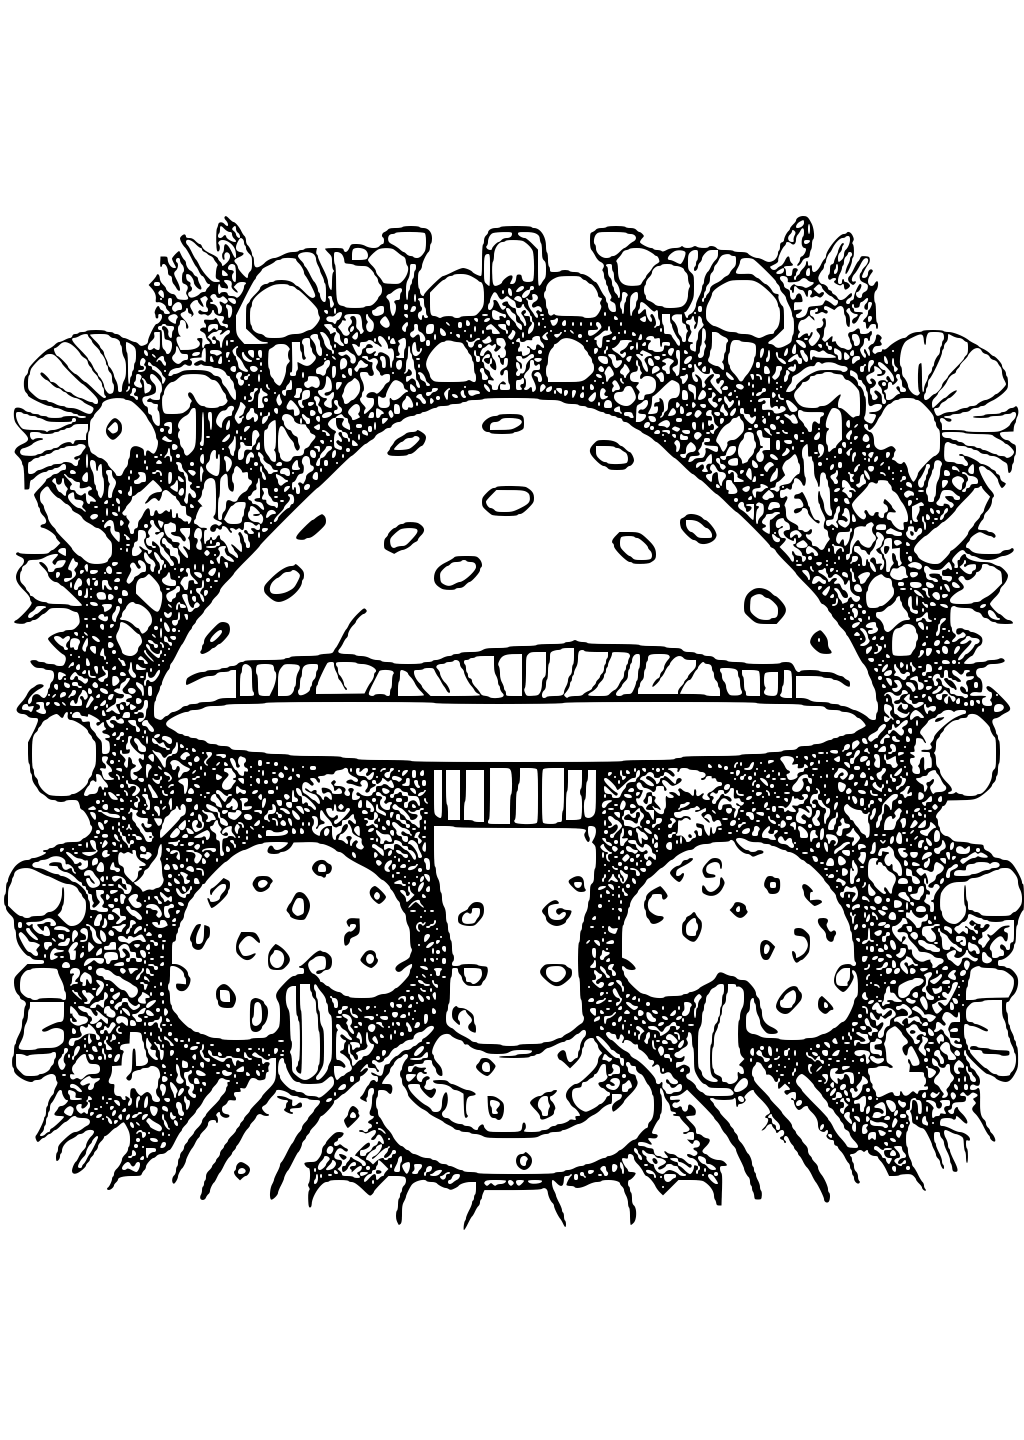 Single Mushroom Coloring Page with Unique Patterns · Creative Fabrica